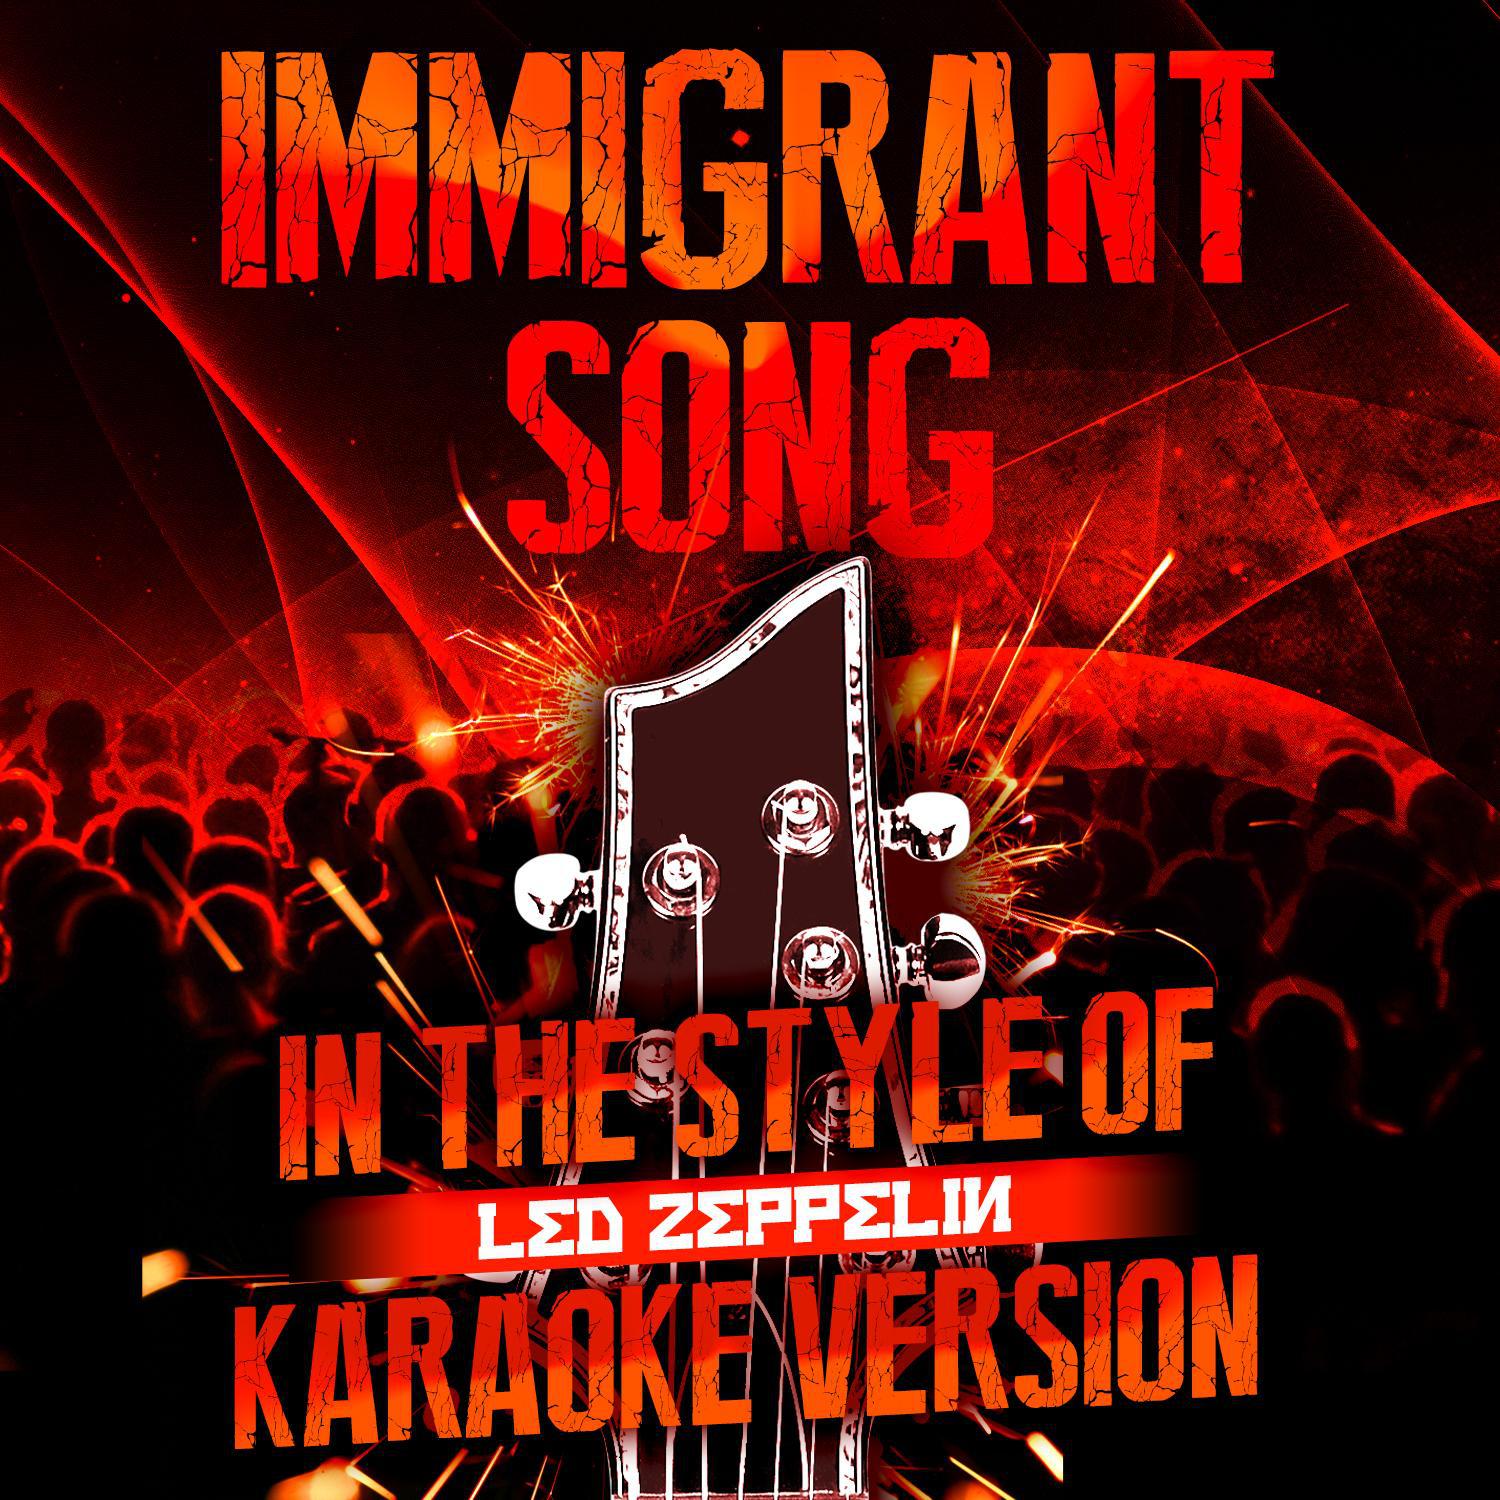 Immigrant Song (In the Style of Led Zeppelin) [Karaoke Version] - Single